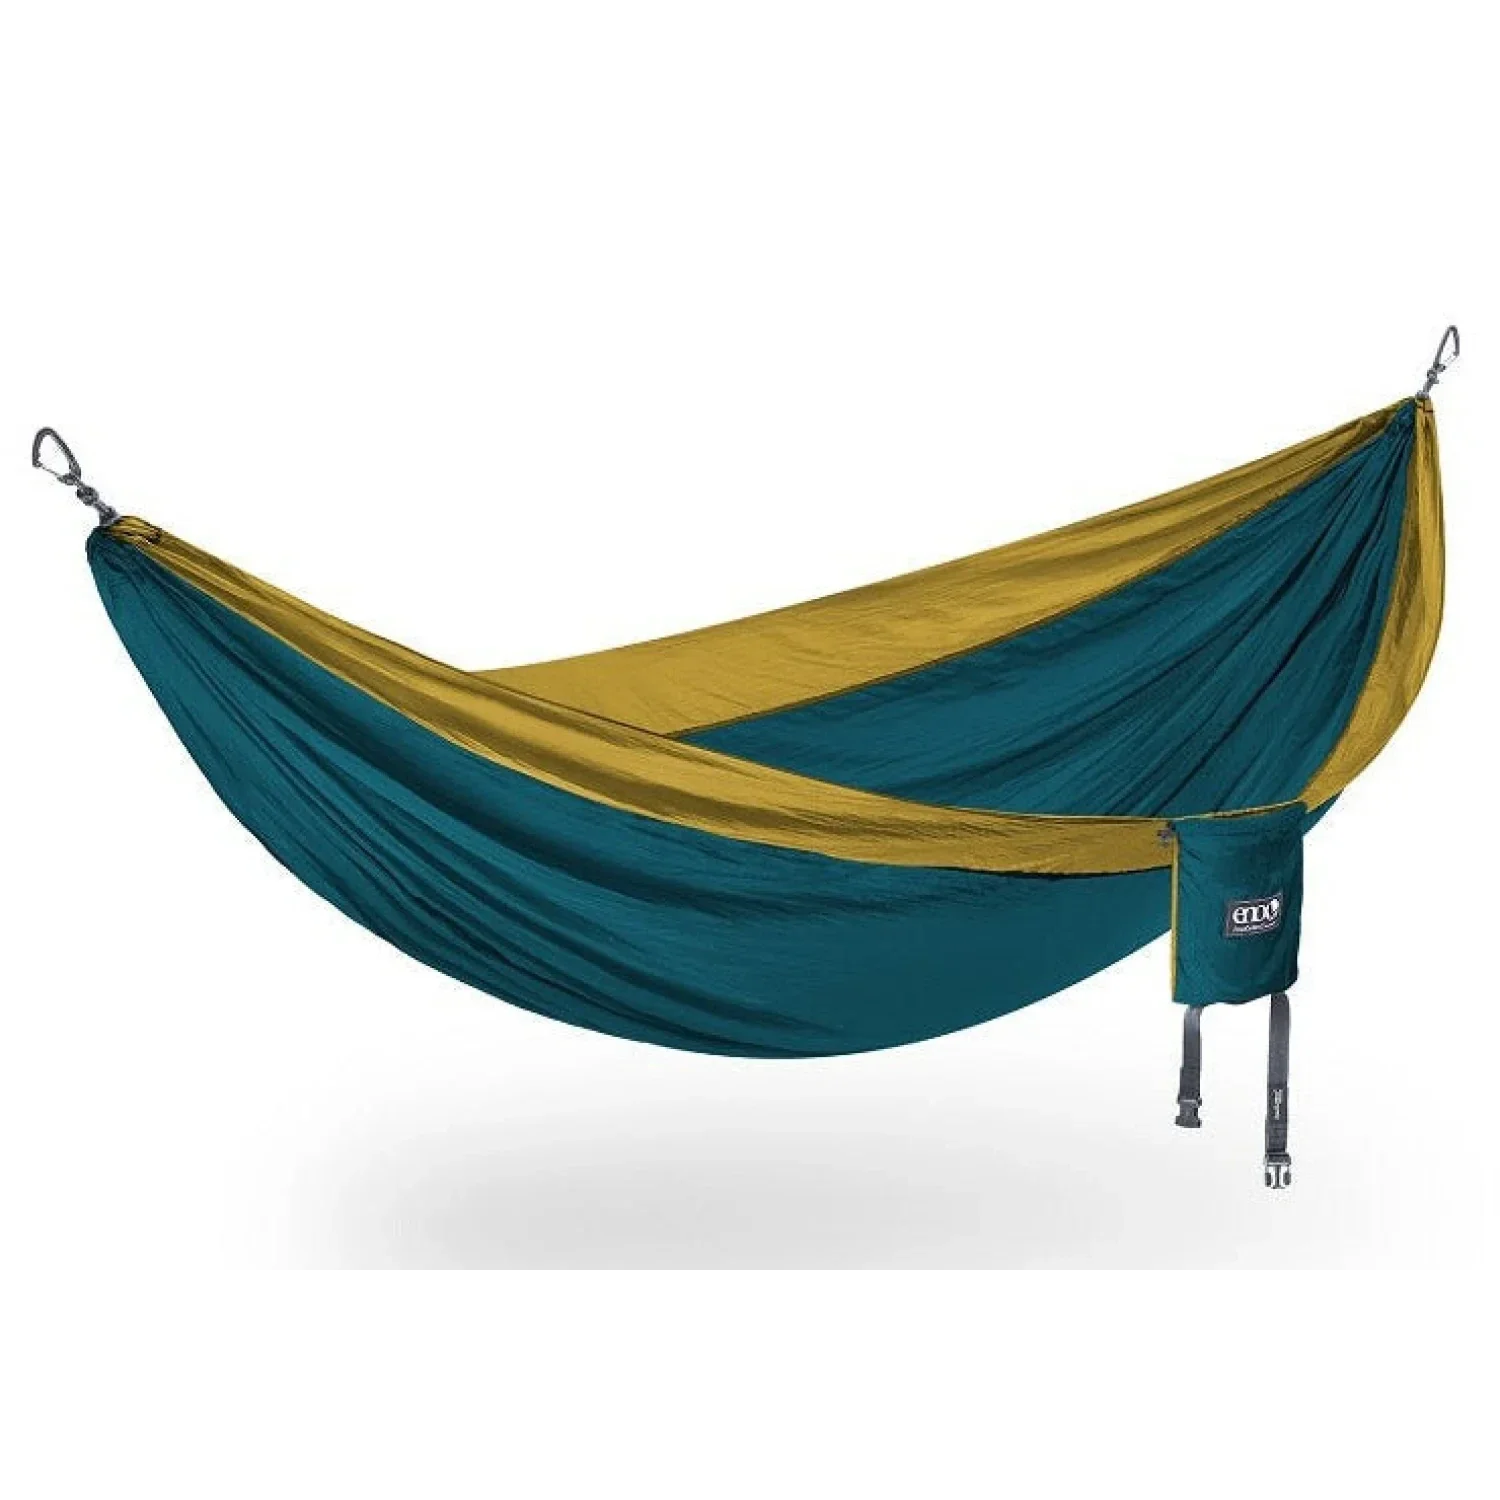 Eagles Nest Outfitters 17. CAMPING ACCESS - HAMMOCKS DoubleNest Hammock MARINE | GOLD